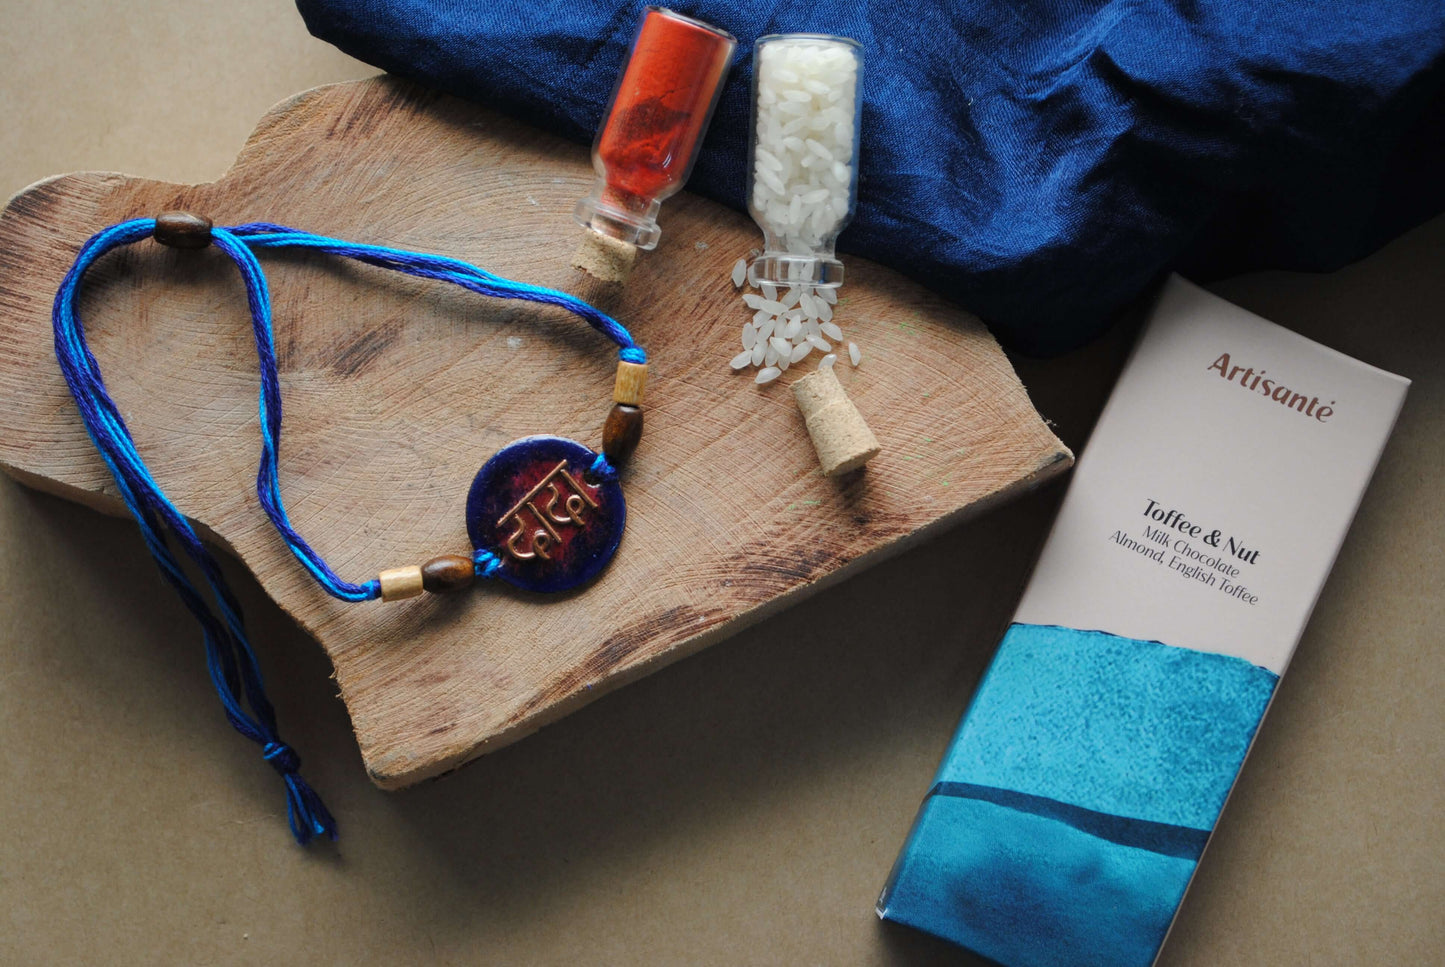 Handcrafted copper enameled rakhi with dada in devnagiri, with a chocolate gift hamper for brothers